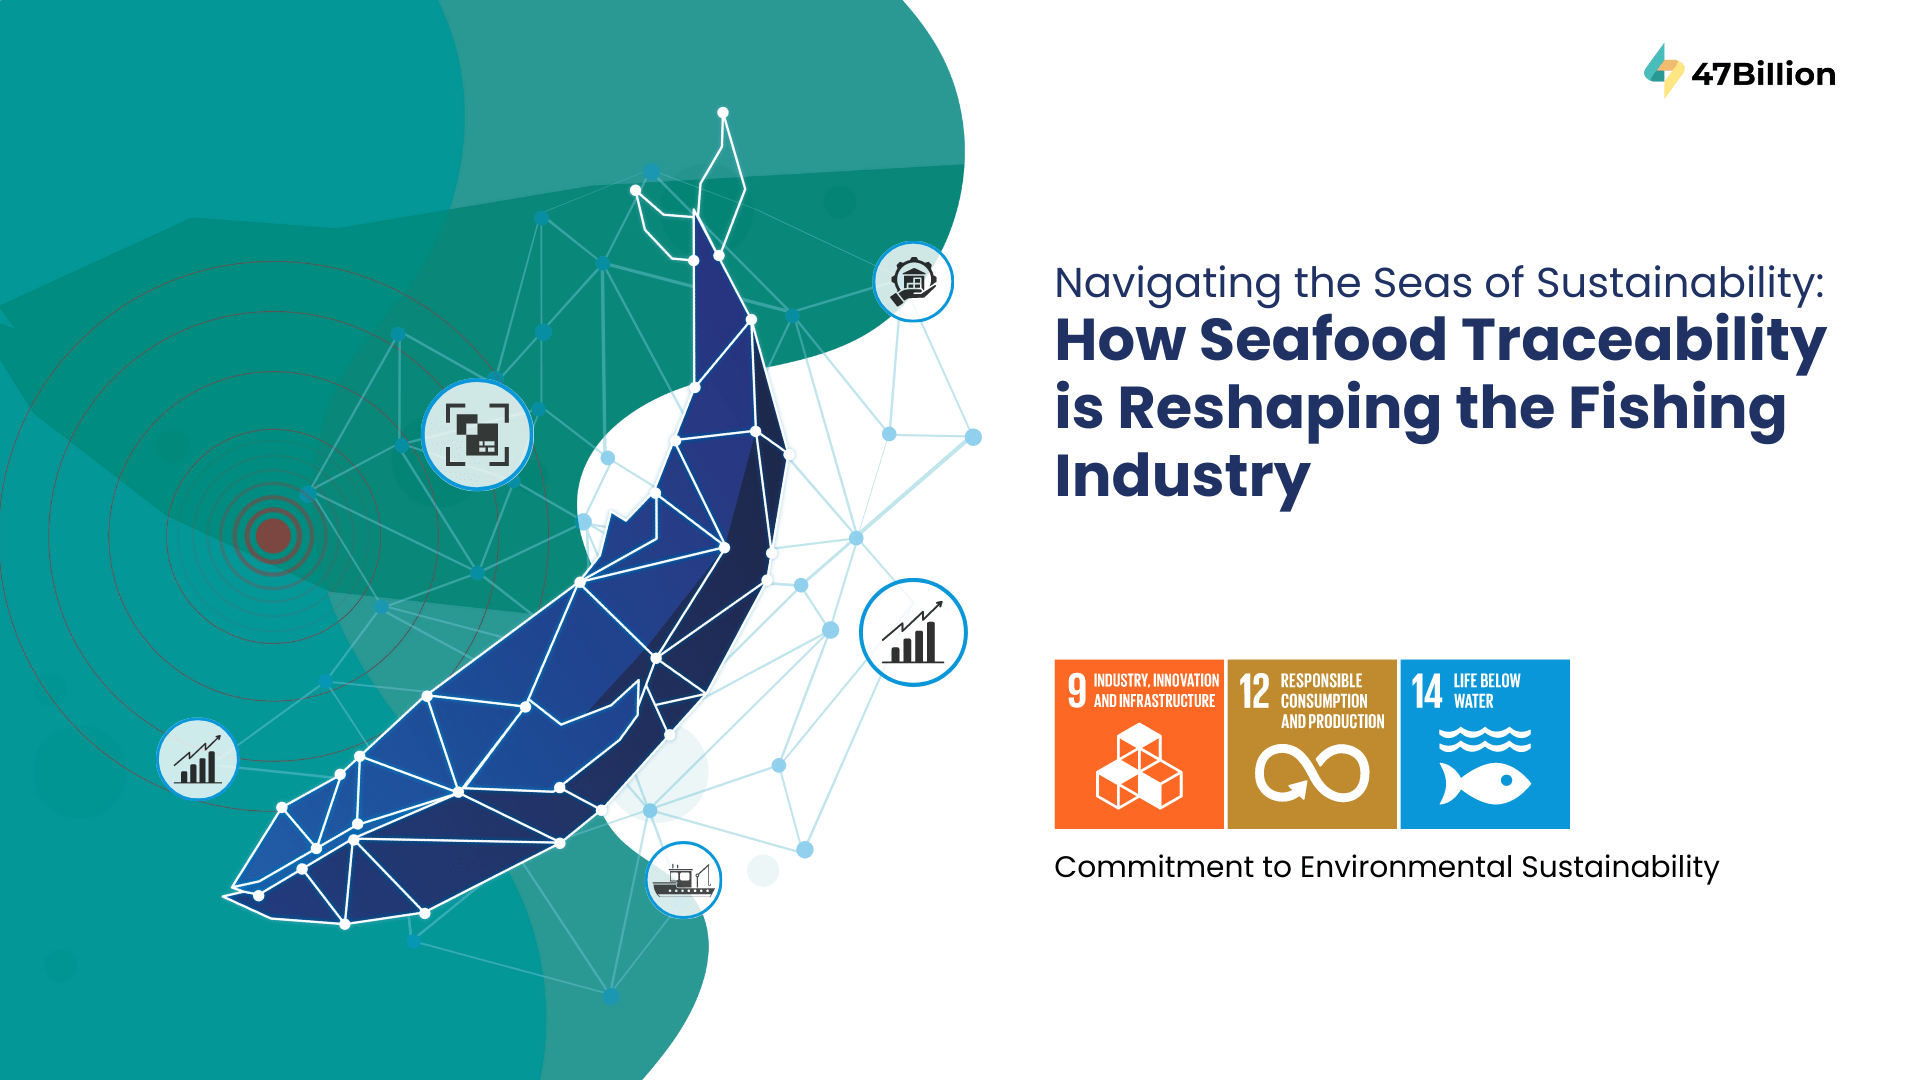 Navigating the Seas of Sustainability: How Seafood Traceability is Reshaping the Fishing Industry 